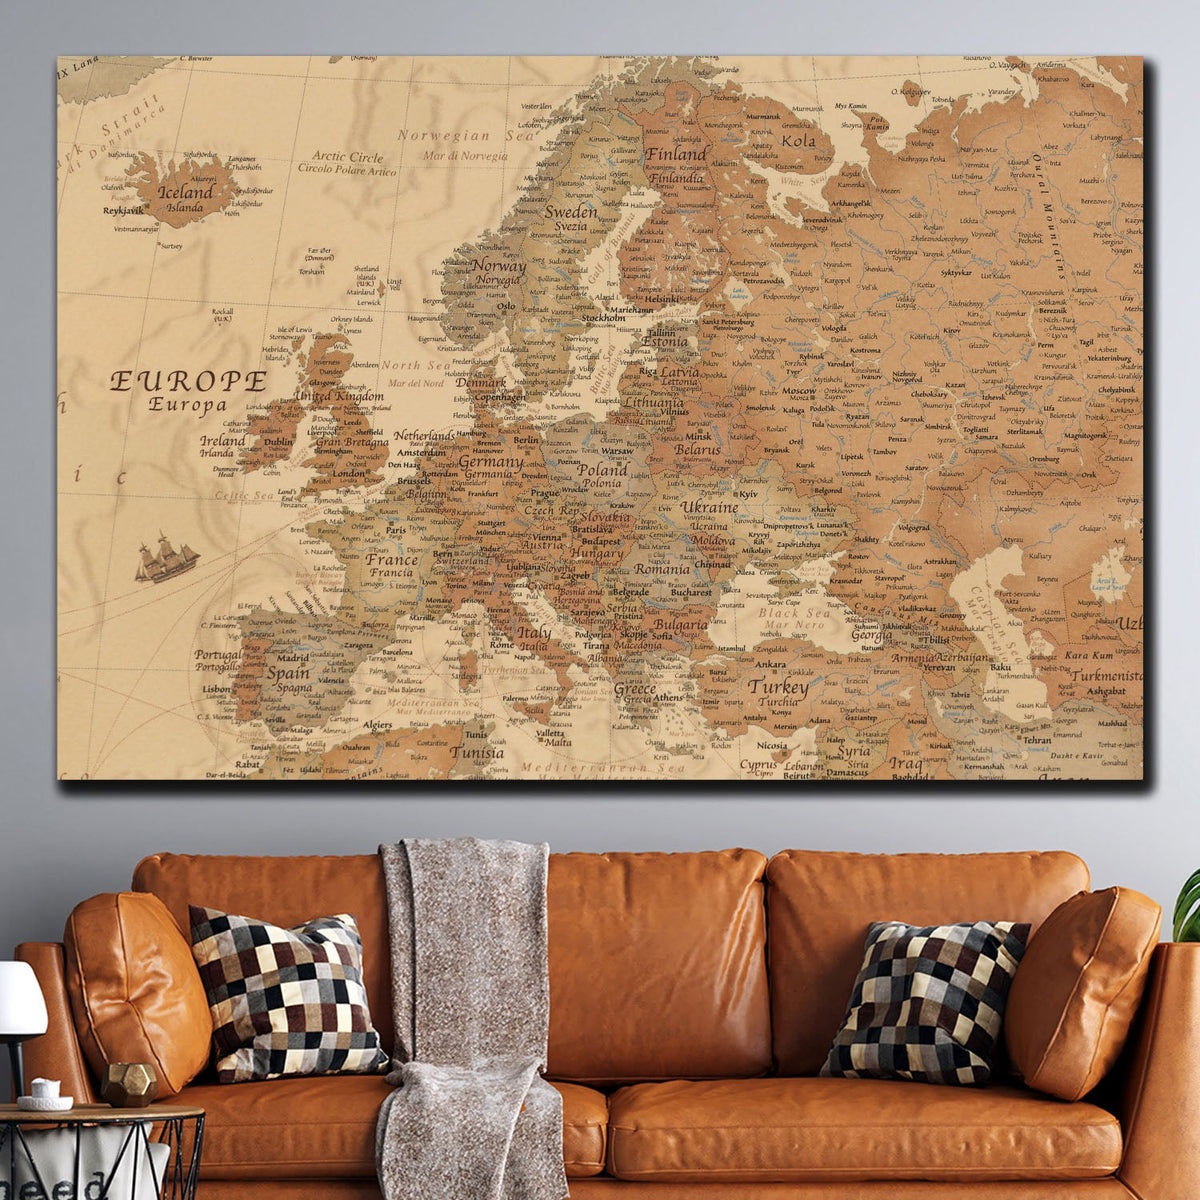 https://cdn.shopify.com/s/files/1/0387/9986/8044/products/AncientGeographicalMapofEuropeCanvasArtprintStretched-1.jpg